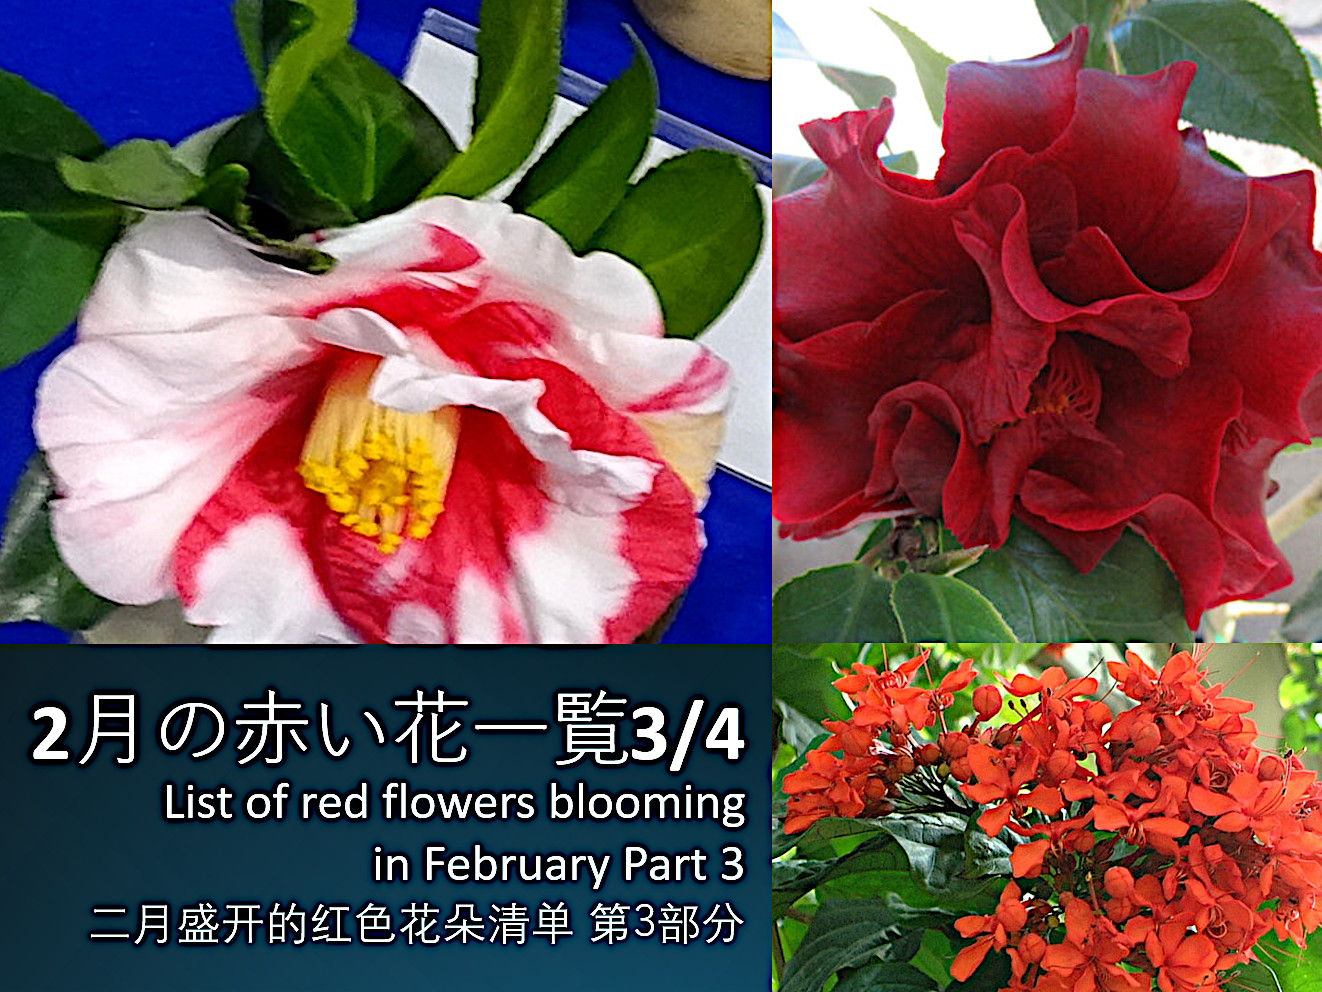 List of red flowers blooming in February Part3